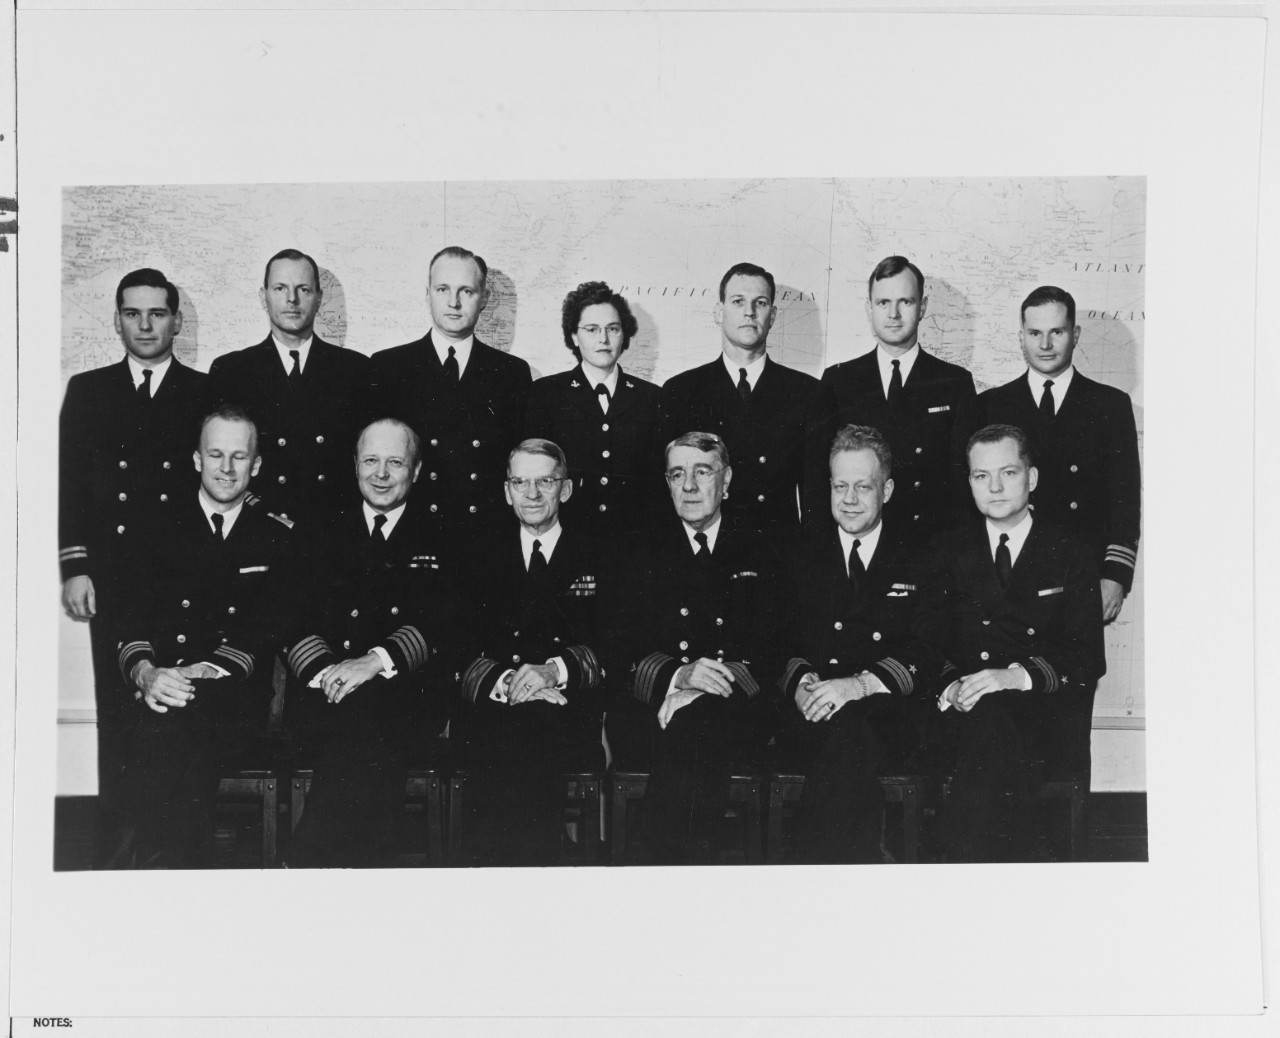 Back row l-r; Lt A.C. Body, LCDR N.S. Barto, Dr J.W. Wakelin, Miss Bettie A. Connie, Lt J. P. Parker, Dr. Bruce Old, LCDR J.T. Burwll,               Front row l-r; LCDR R.A. Krause, Capt Lybrand Smith, Rear admiral J.A. Furer, Capt F.S. Smith, CDR R.D. Conrad LCDR H.G. Dyke